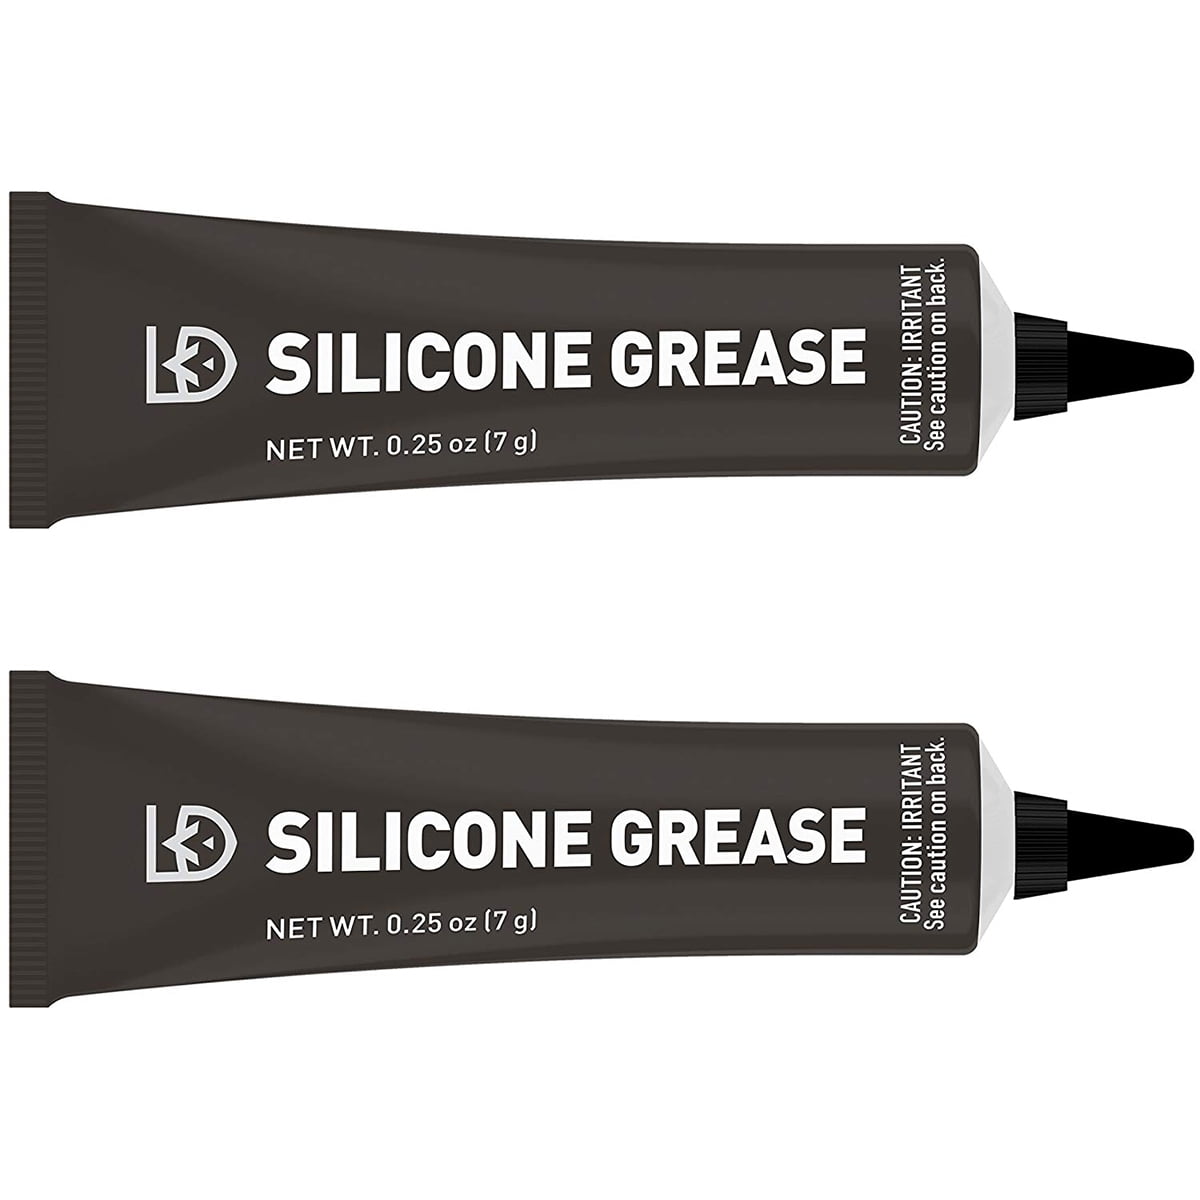 Plastic Coffee Machines Silicone Grease Lubricant 7g For O-rings Rubber